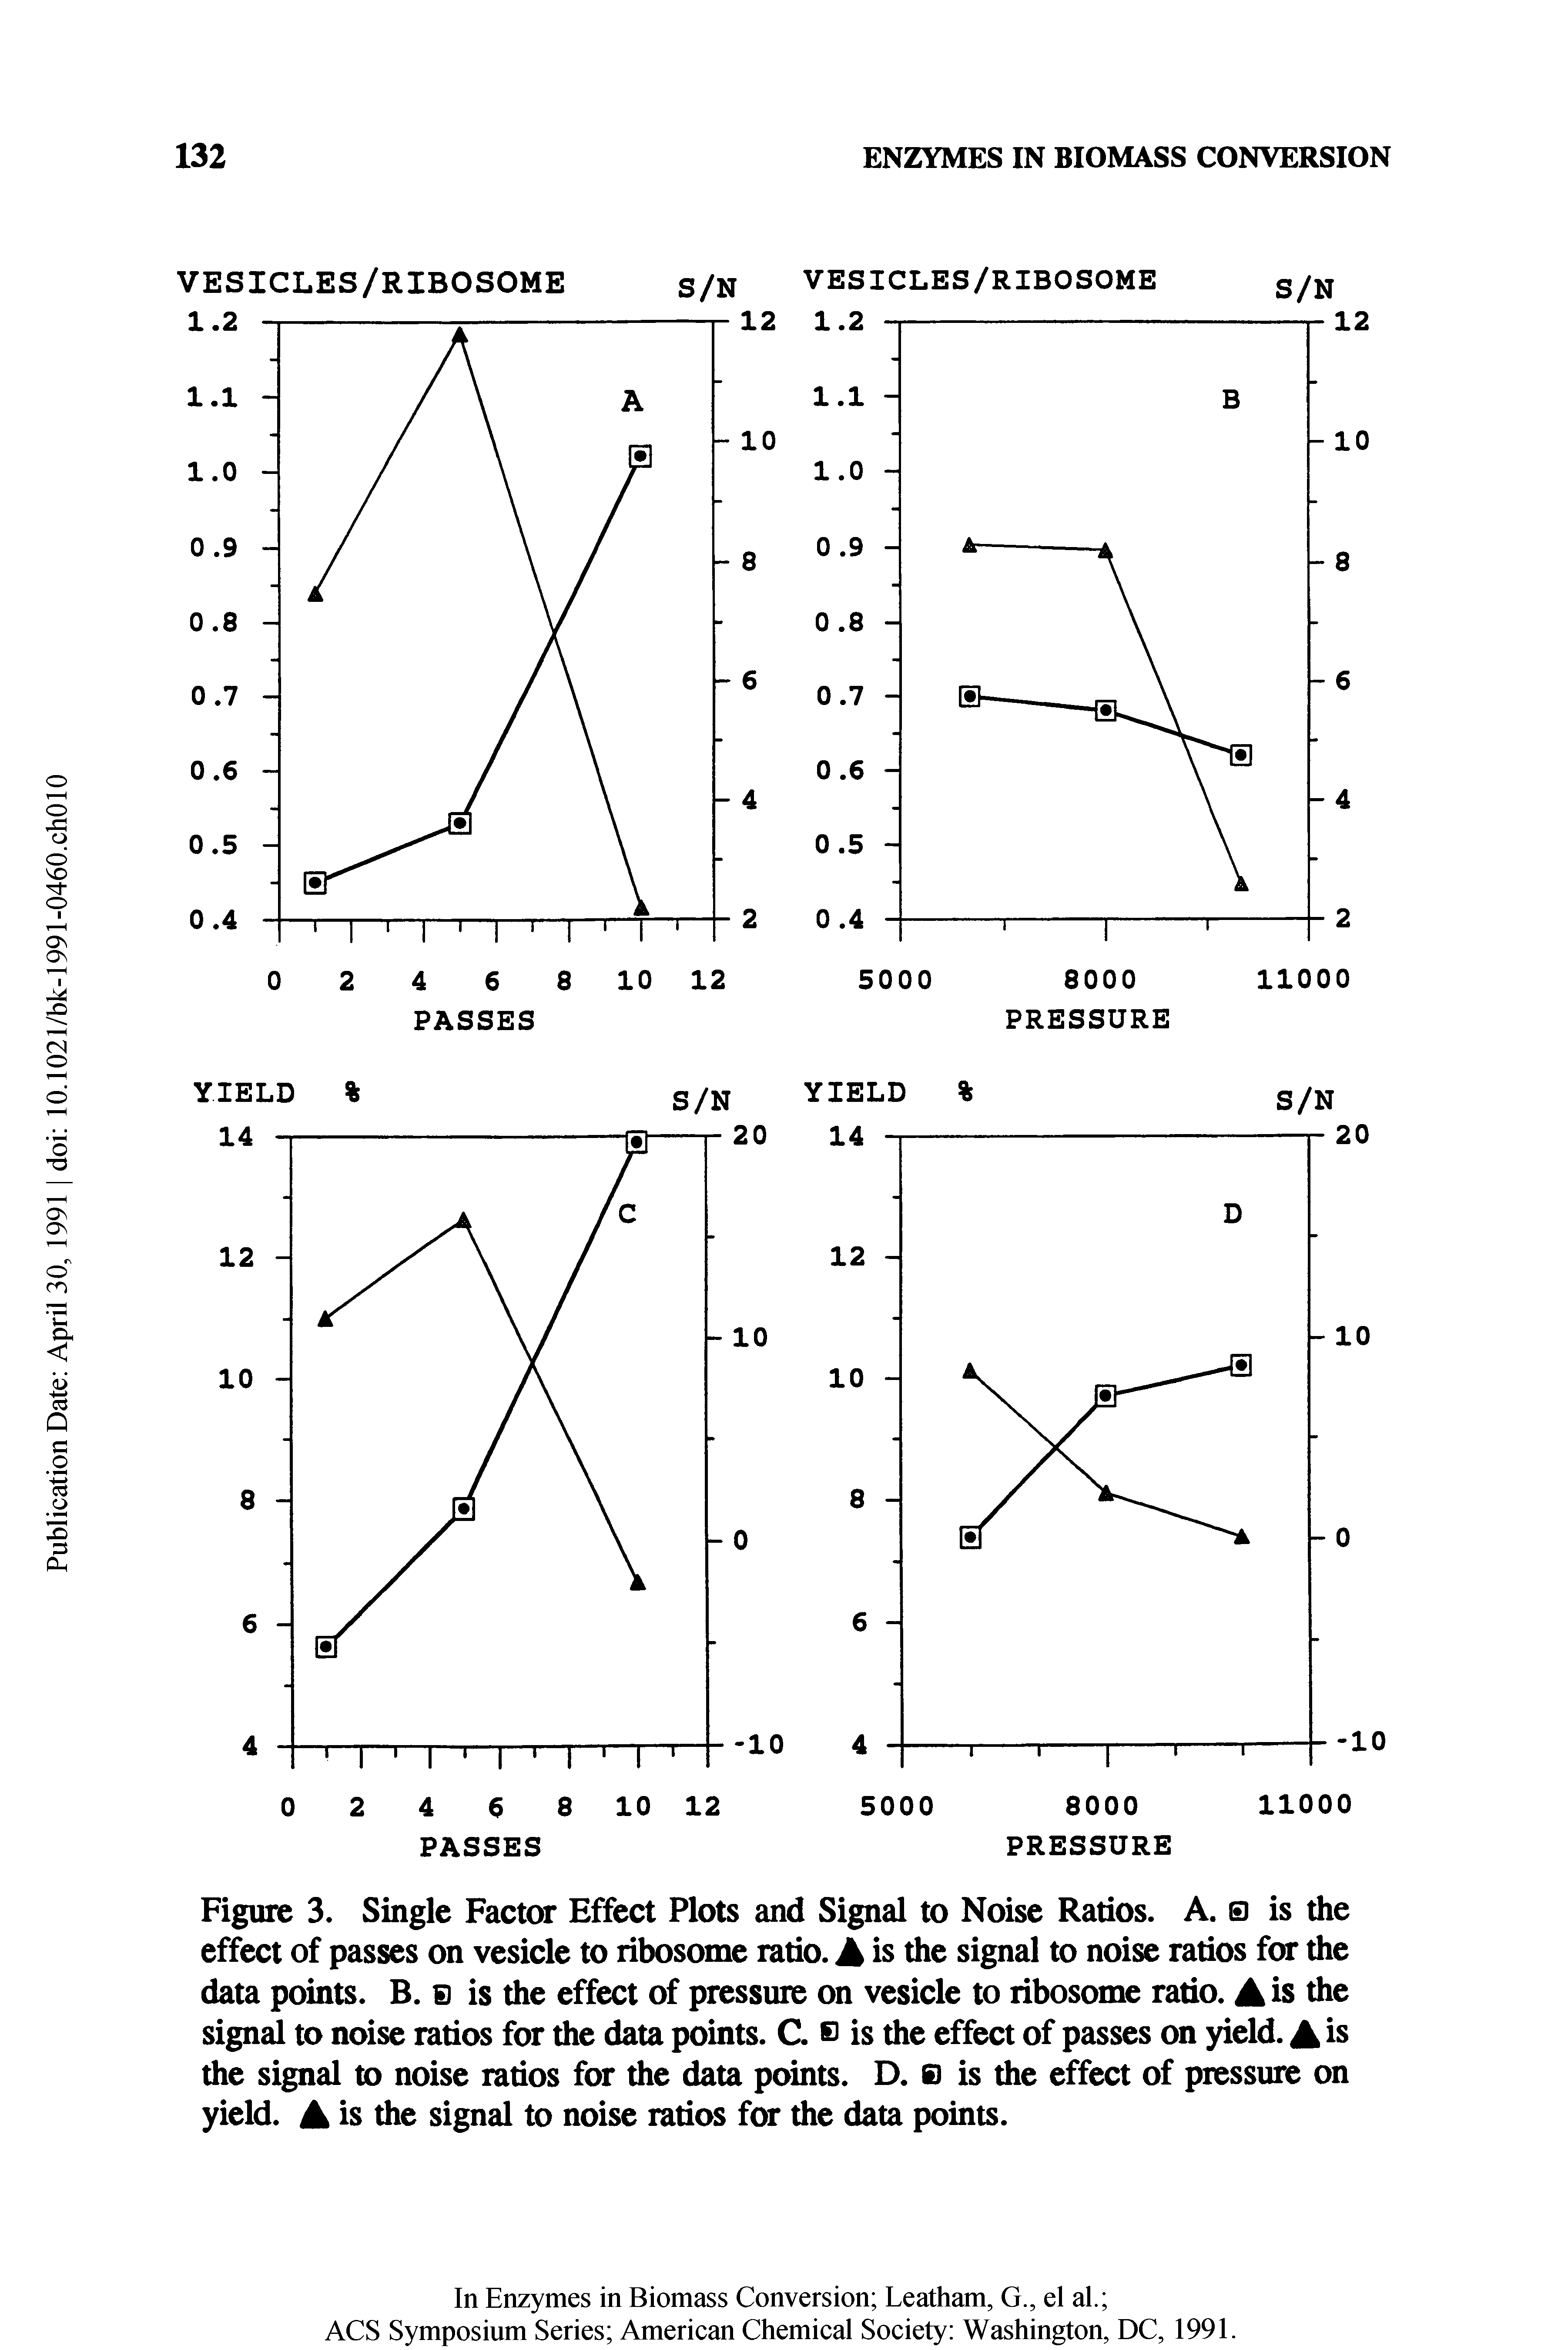 Figure 3. Single Factor Effect Plots and Signal to Noise Ratios. A. 0 is the effect of passes on vesicle to ribosome ratio. A is the signal to noise ratios for the data points. B. e is the effect of pressure on vesicle to ribosome ratio. A is the signal to noise ratios for the data points. C. b is the effect of passes on yield. A is the signal to noise ratios for the data points. D. o is the effect of pressure on yield. A is the signal to noise ratios for the data points.